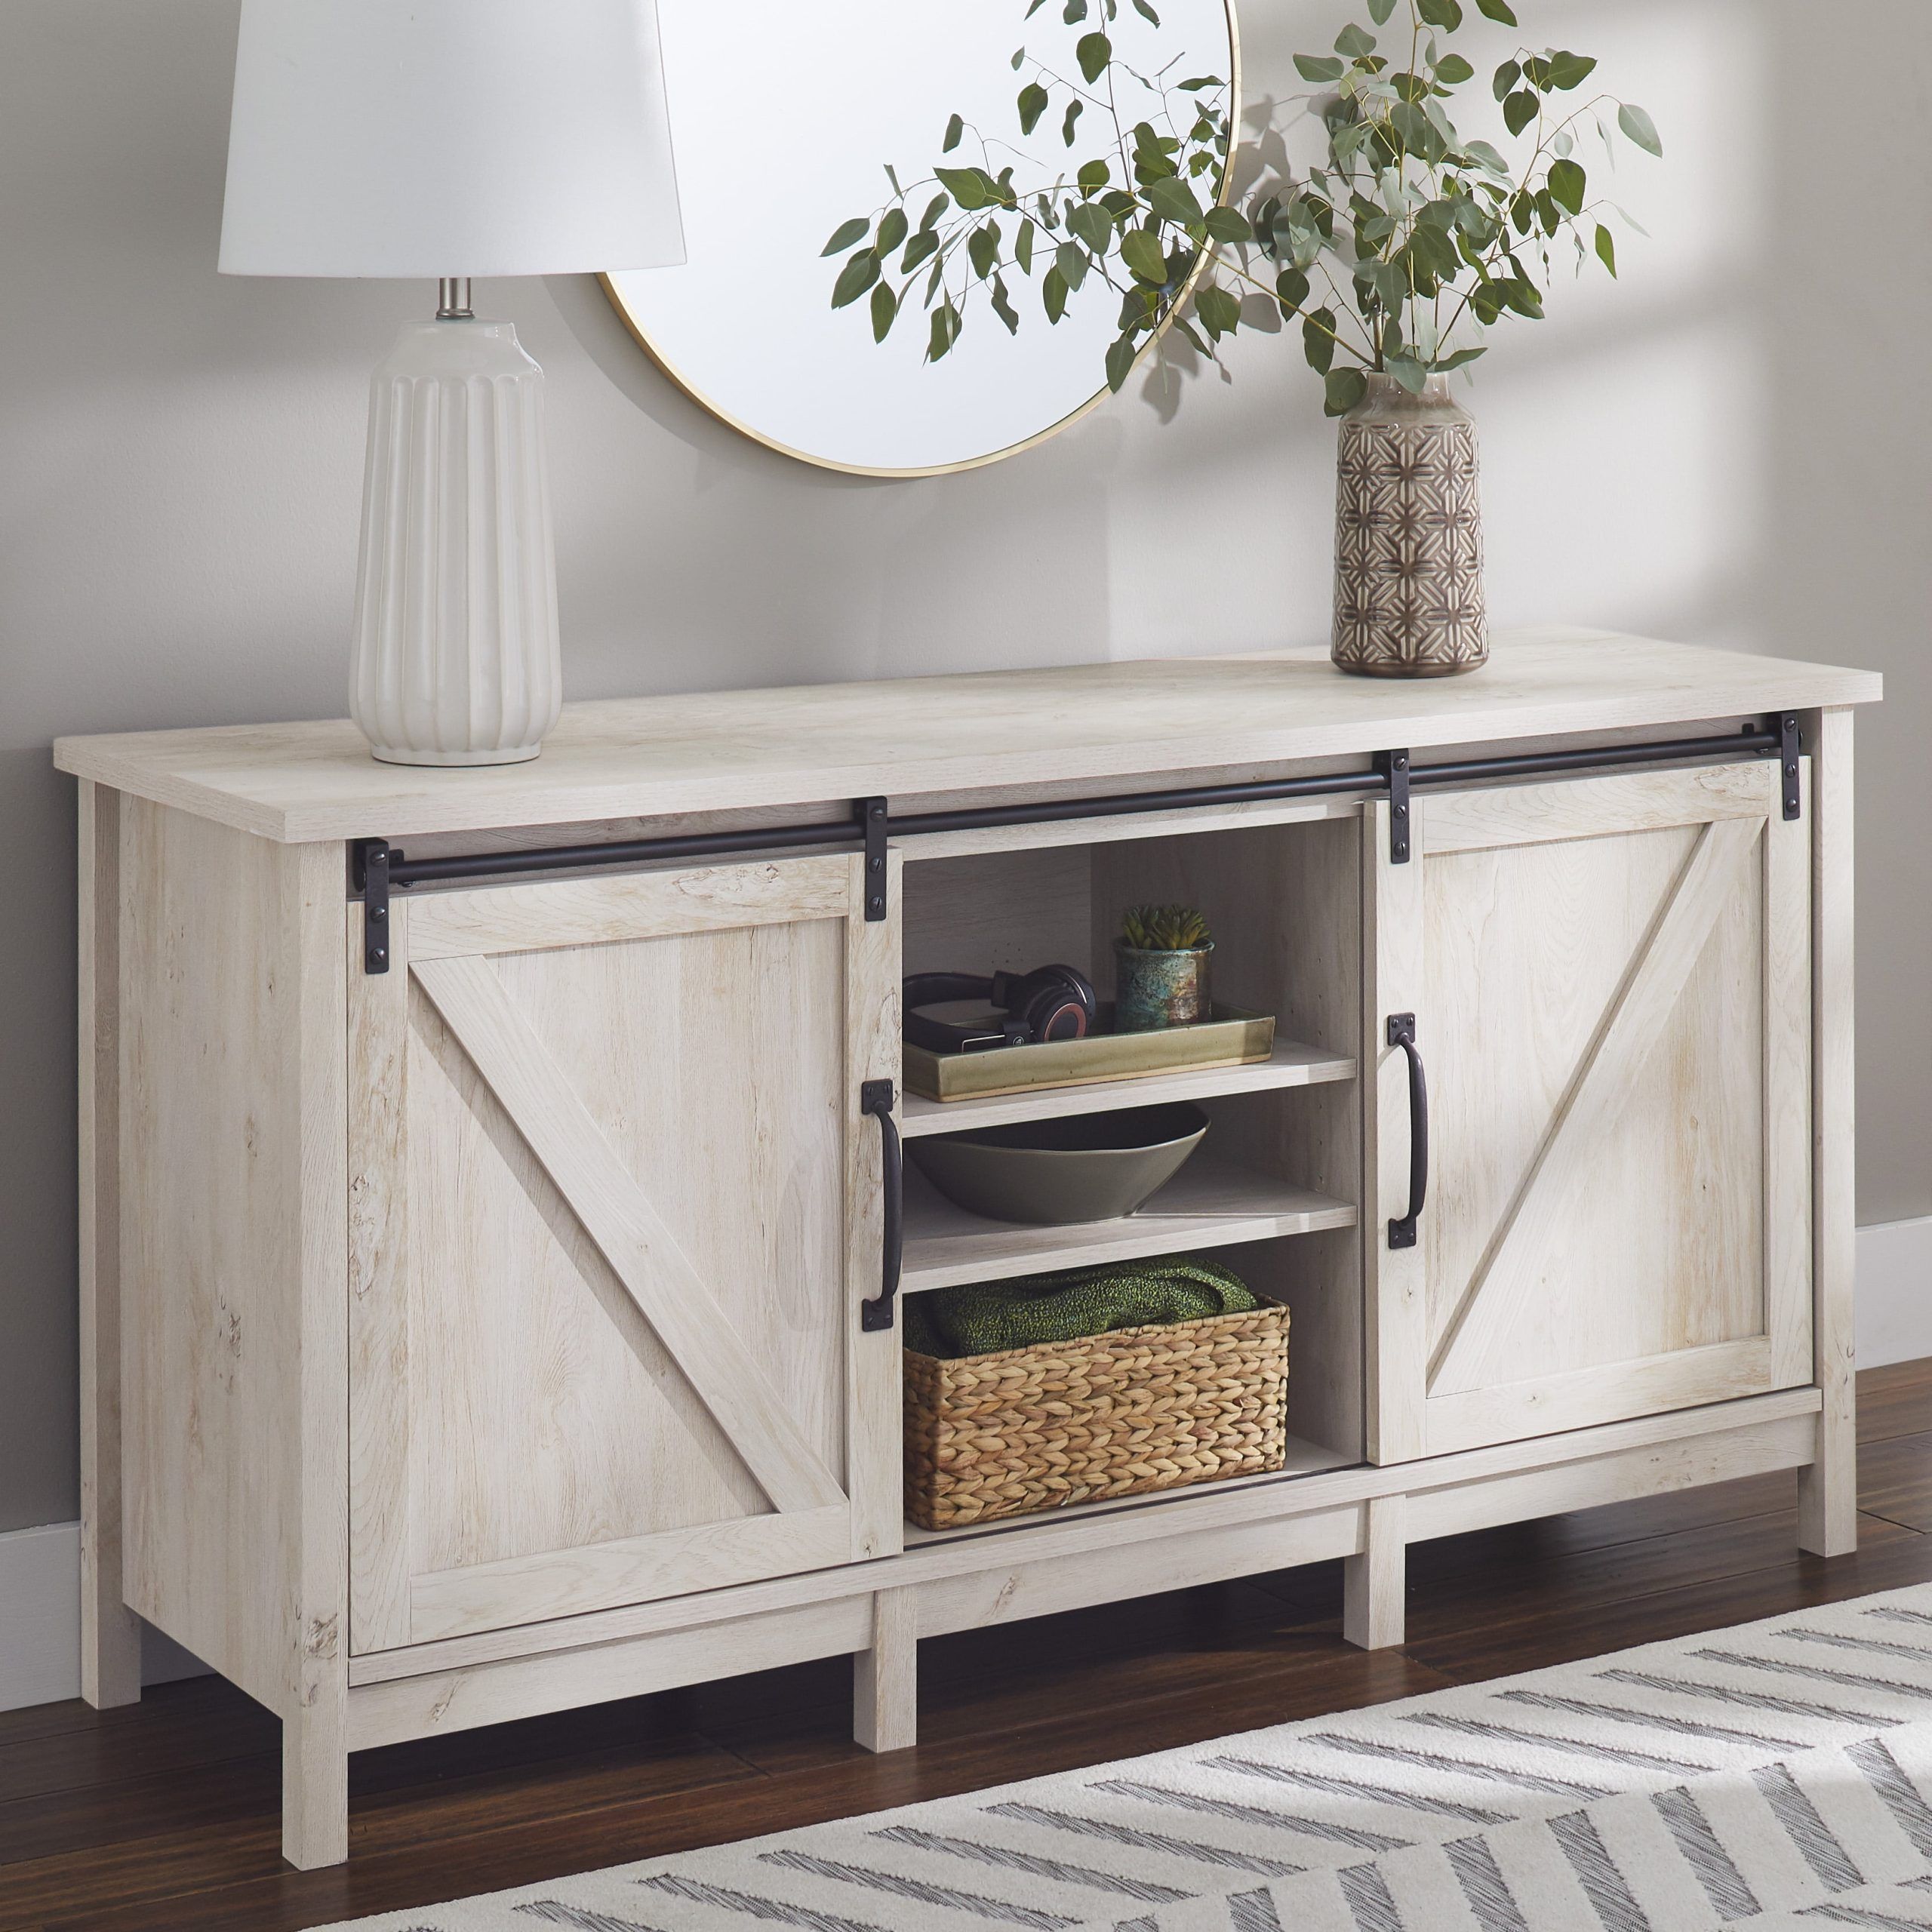 Better Homes & Gardens Modern Farmhouse Tv Stand For Tvs Up To 70", Rustic  White Finish – Walmart With Regard To Modern Farmhouse Rustic Tv Stands (Photo 8 of 15)